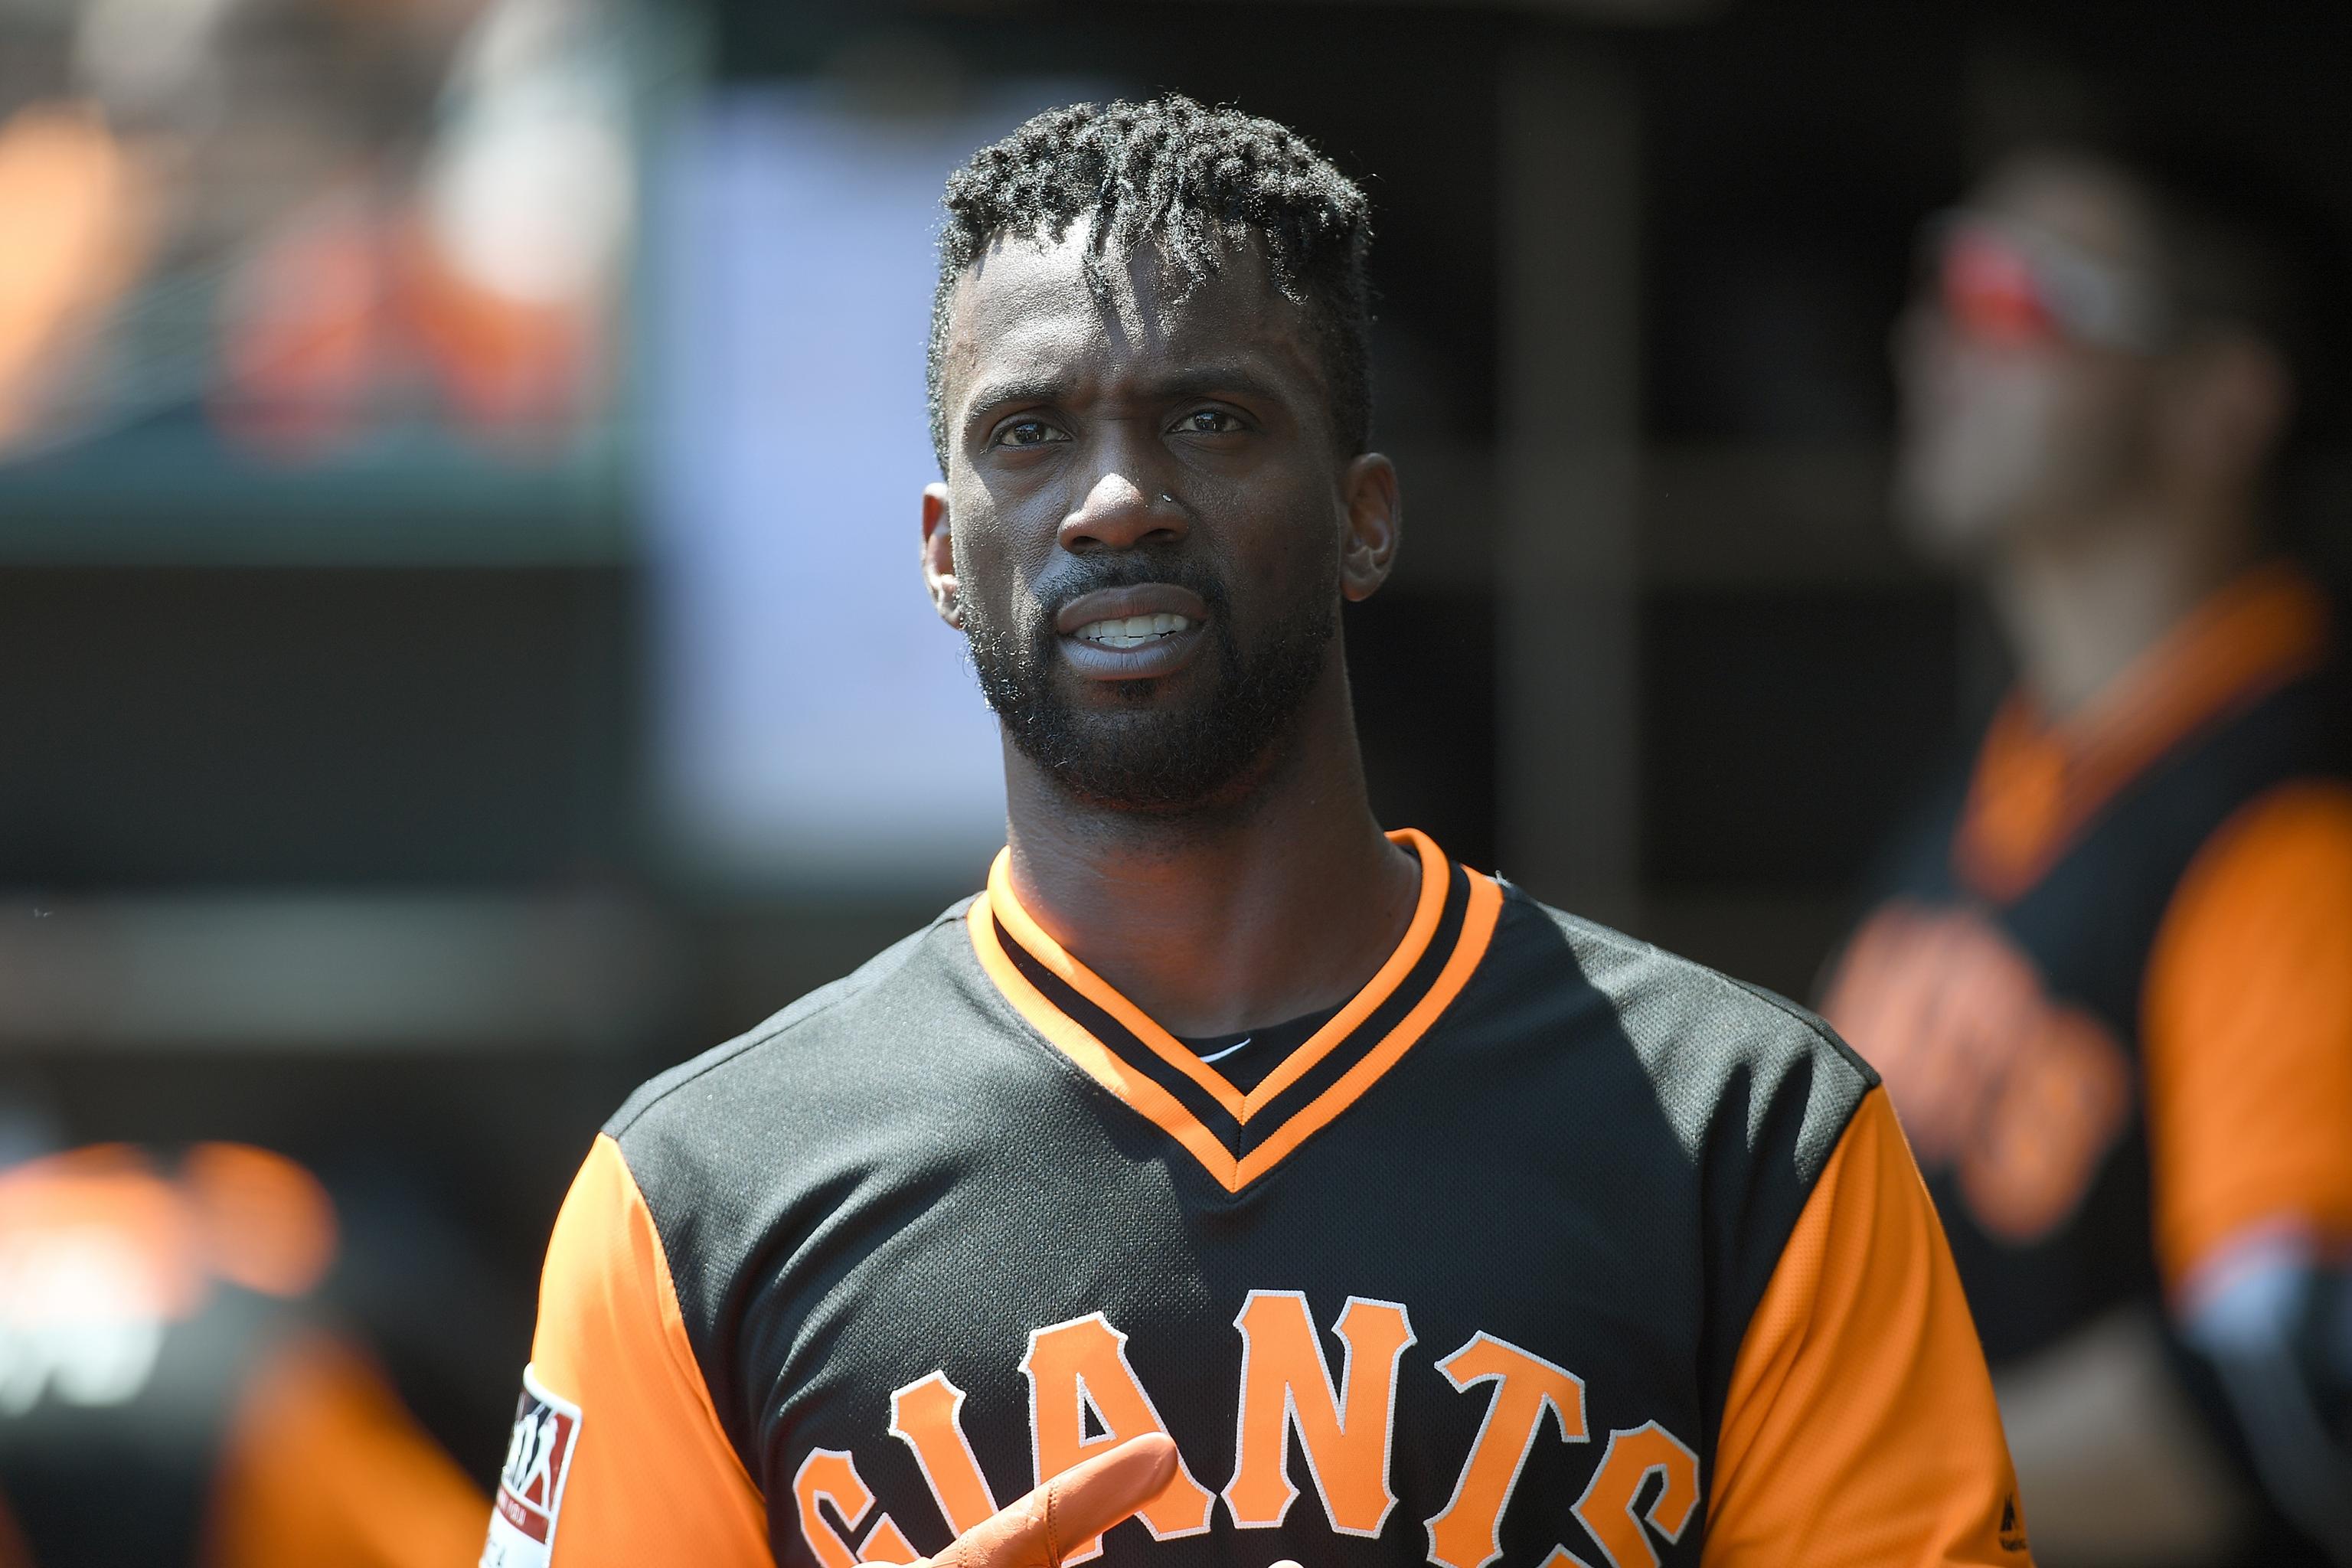 Andrew McCutchen played for the Yankees, and that's worth remembering -  Pinstripe Alley